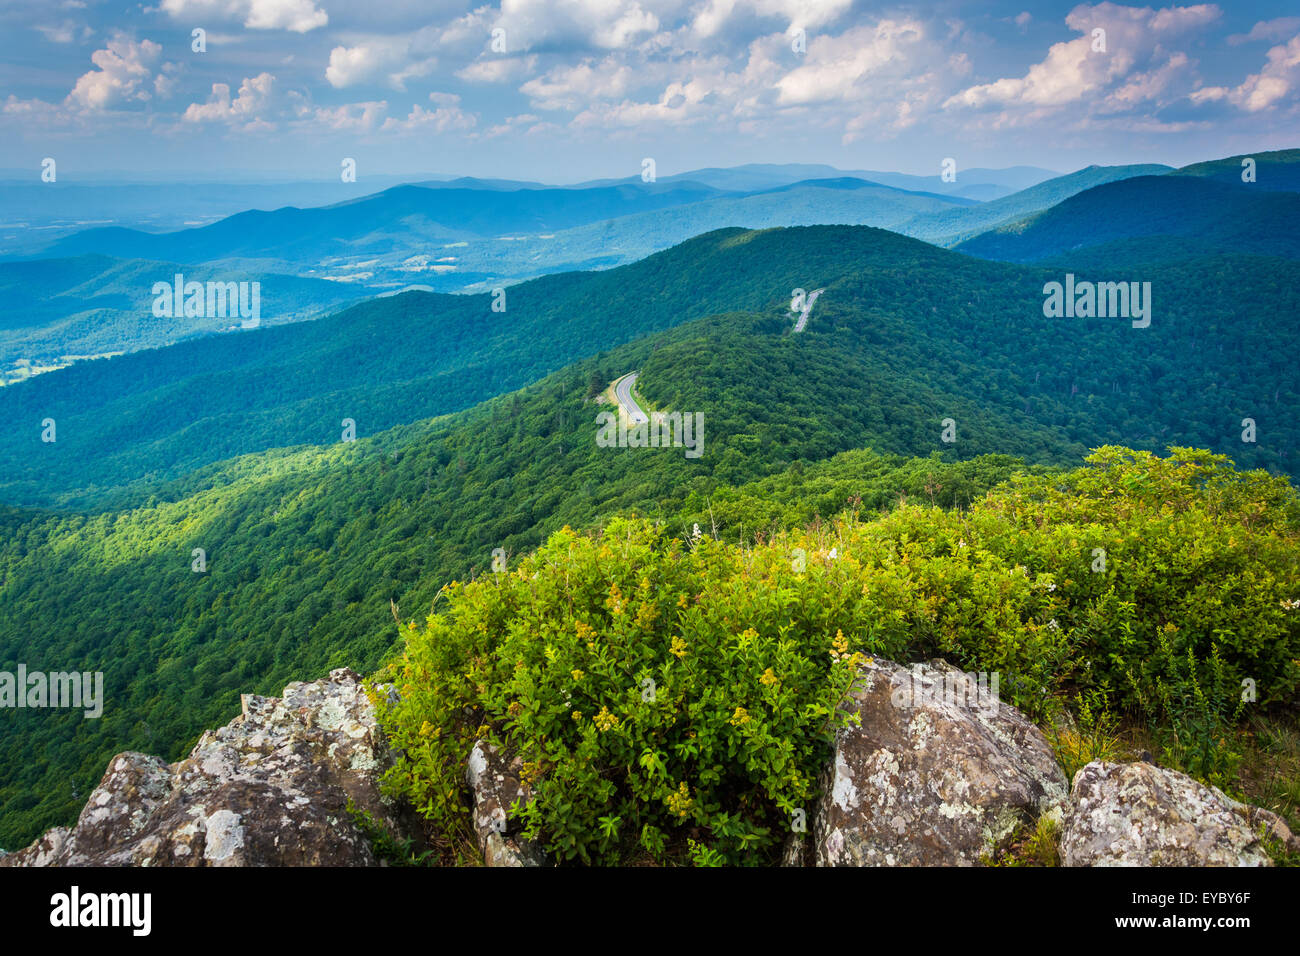 View of the Blue Ridge Mountains from Little Stony Man Cliffs in Shenandoah National Park, Virginia. Stock Photo